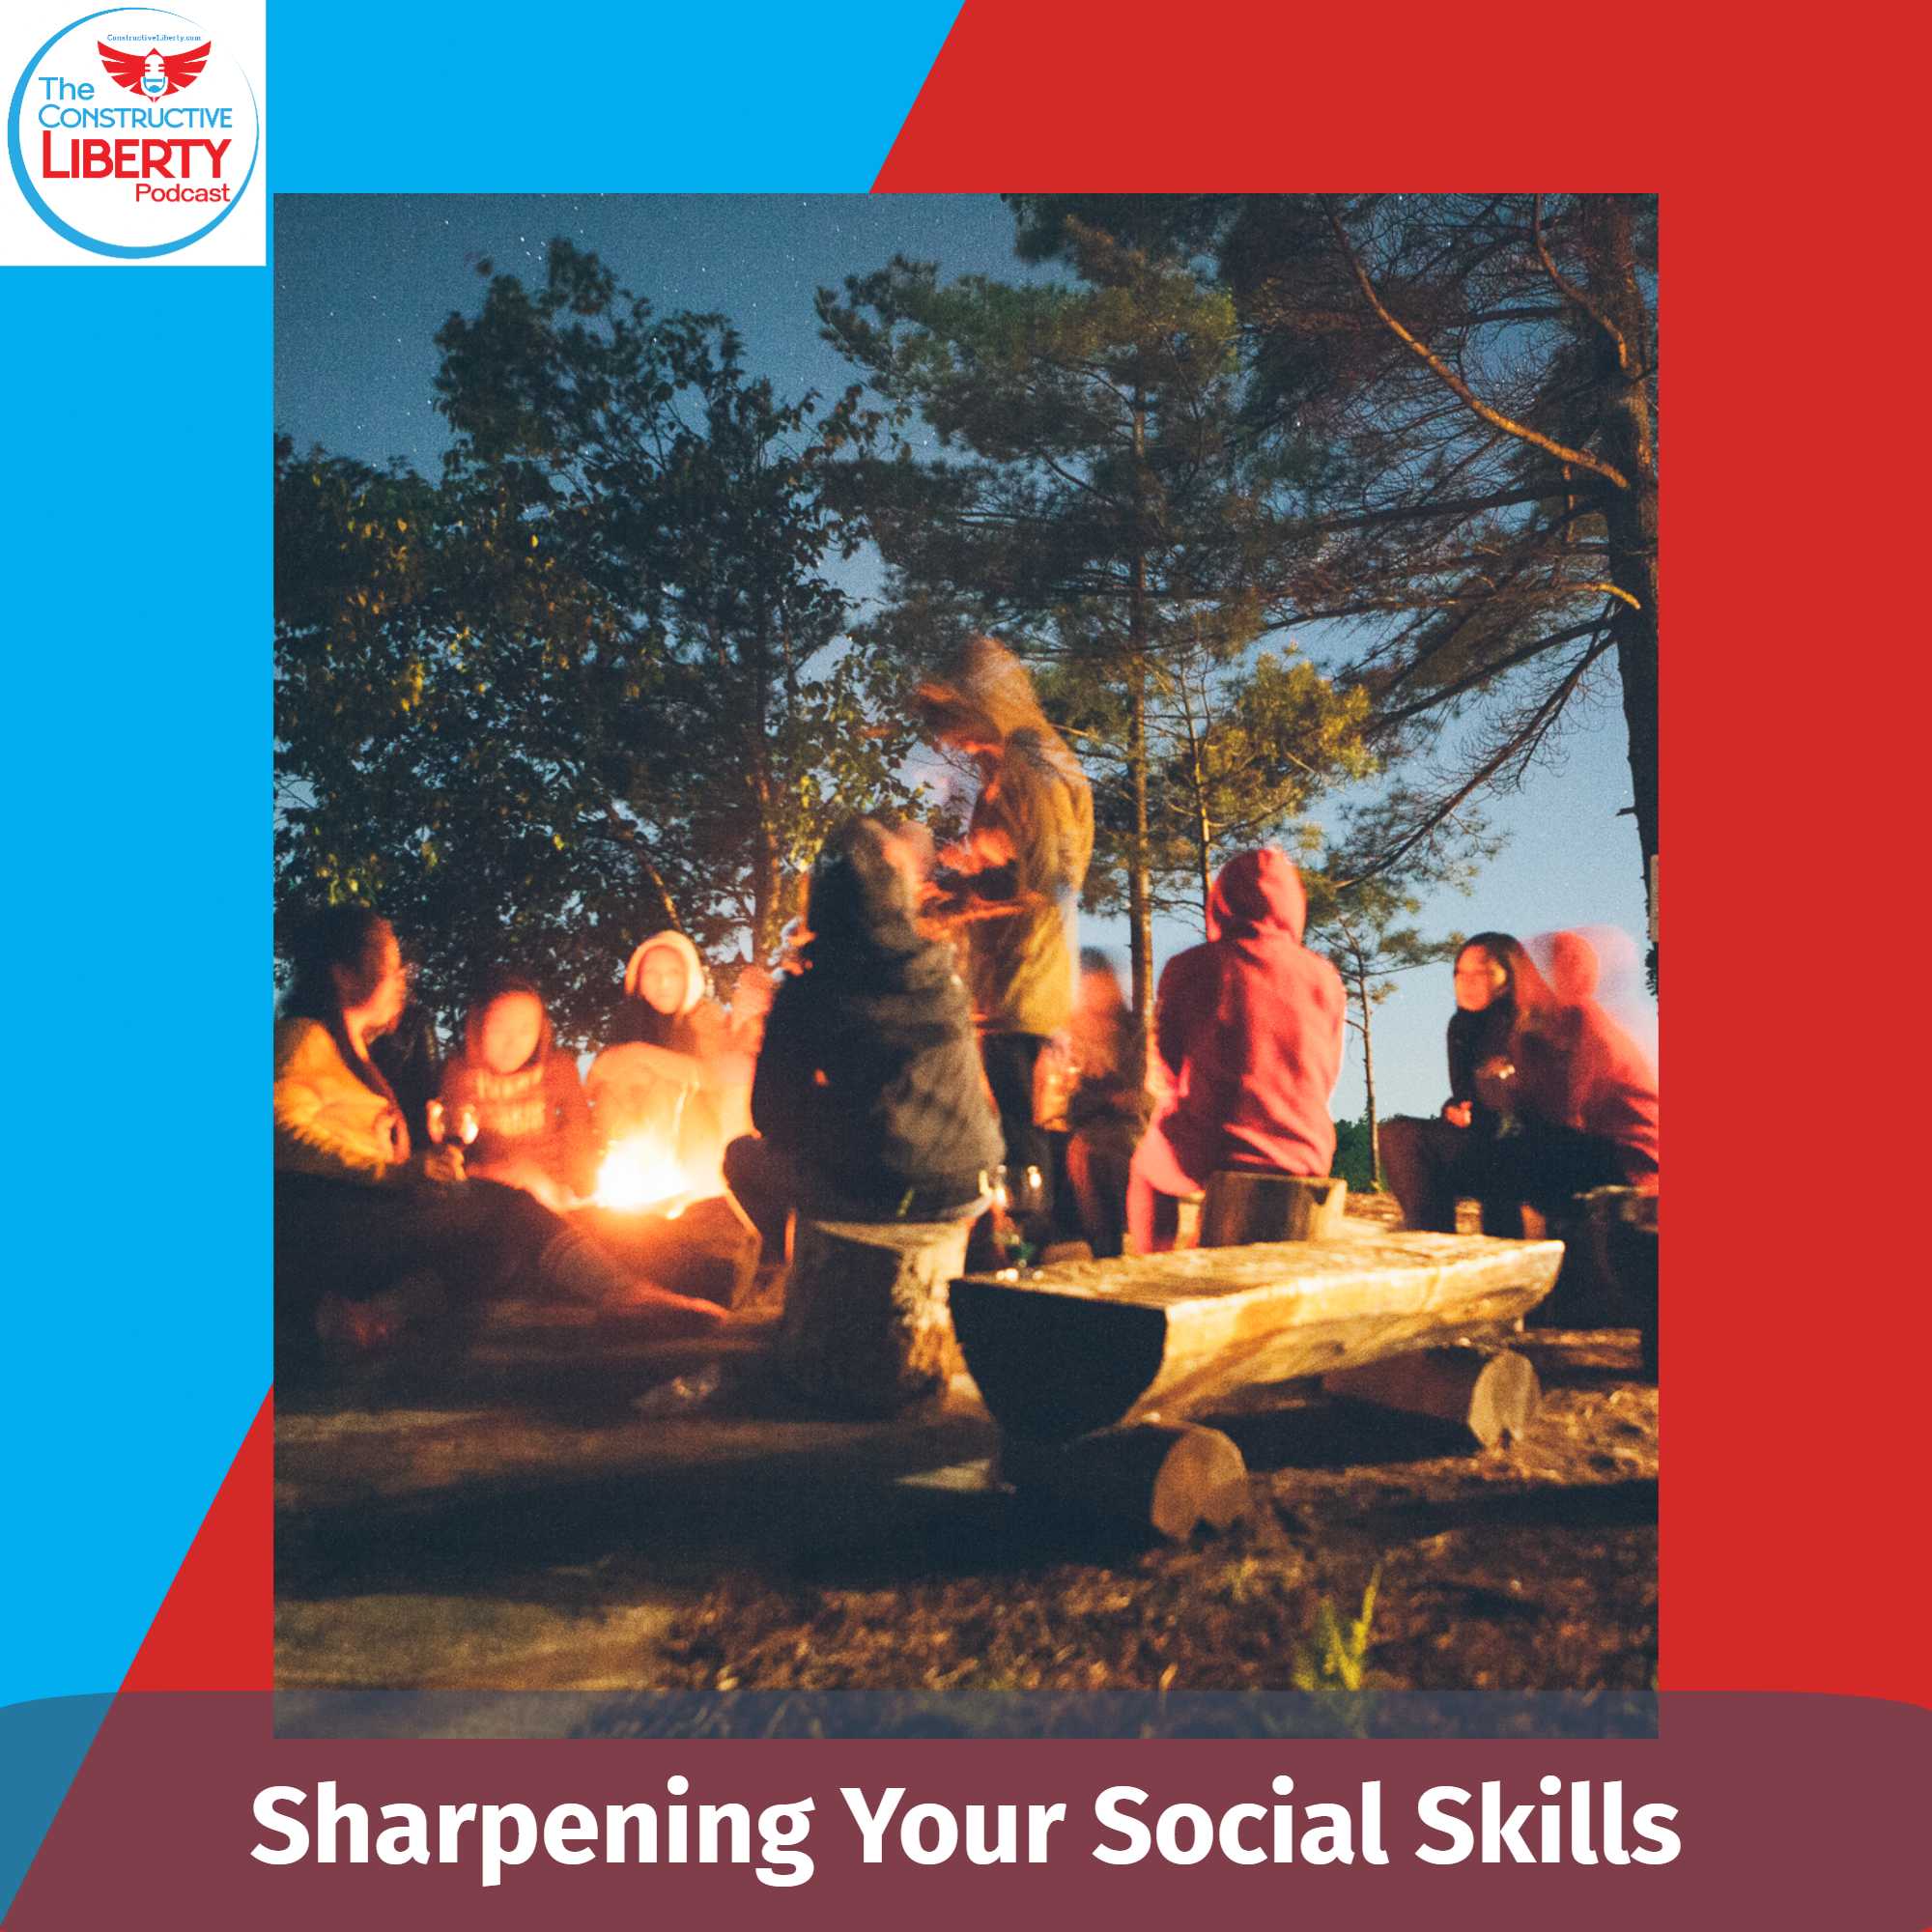 How to Sharpen Your Social Skills